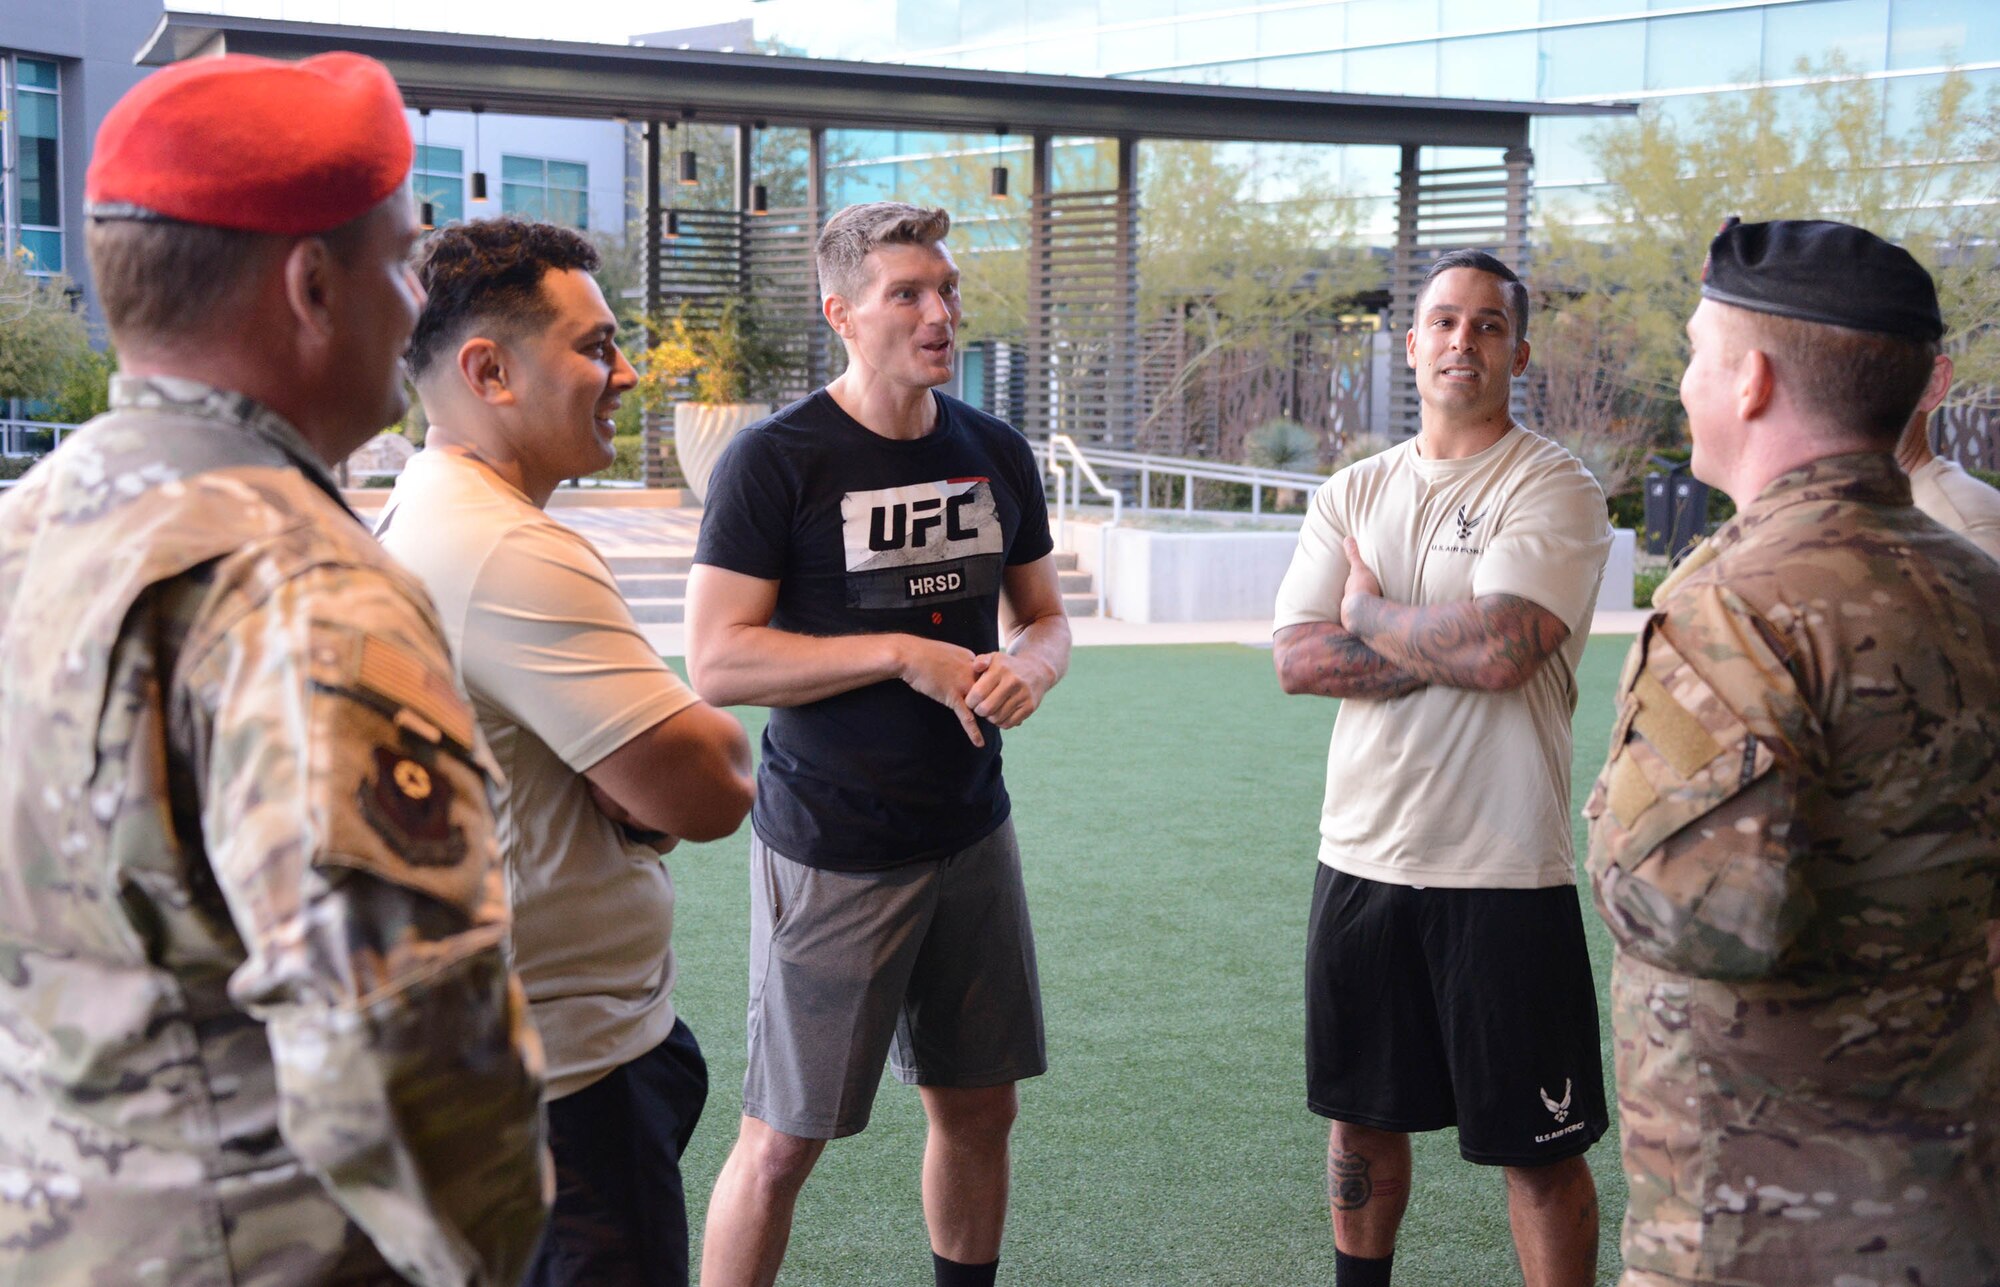 Special warfare Airmen share stories with UFC fighter Stephen Thompson during a filming at the Ultimate Fighting Championship Performance Institute in Las Vegas, Nevada.